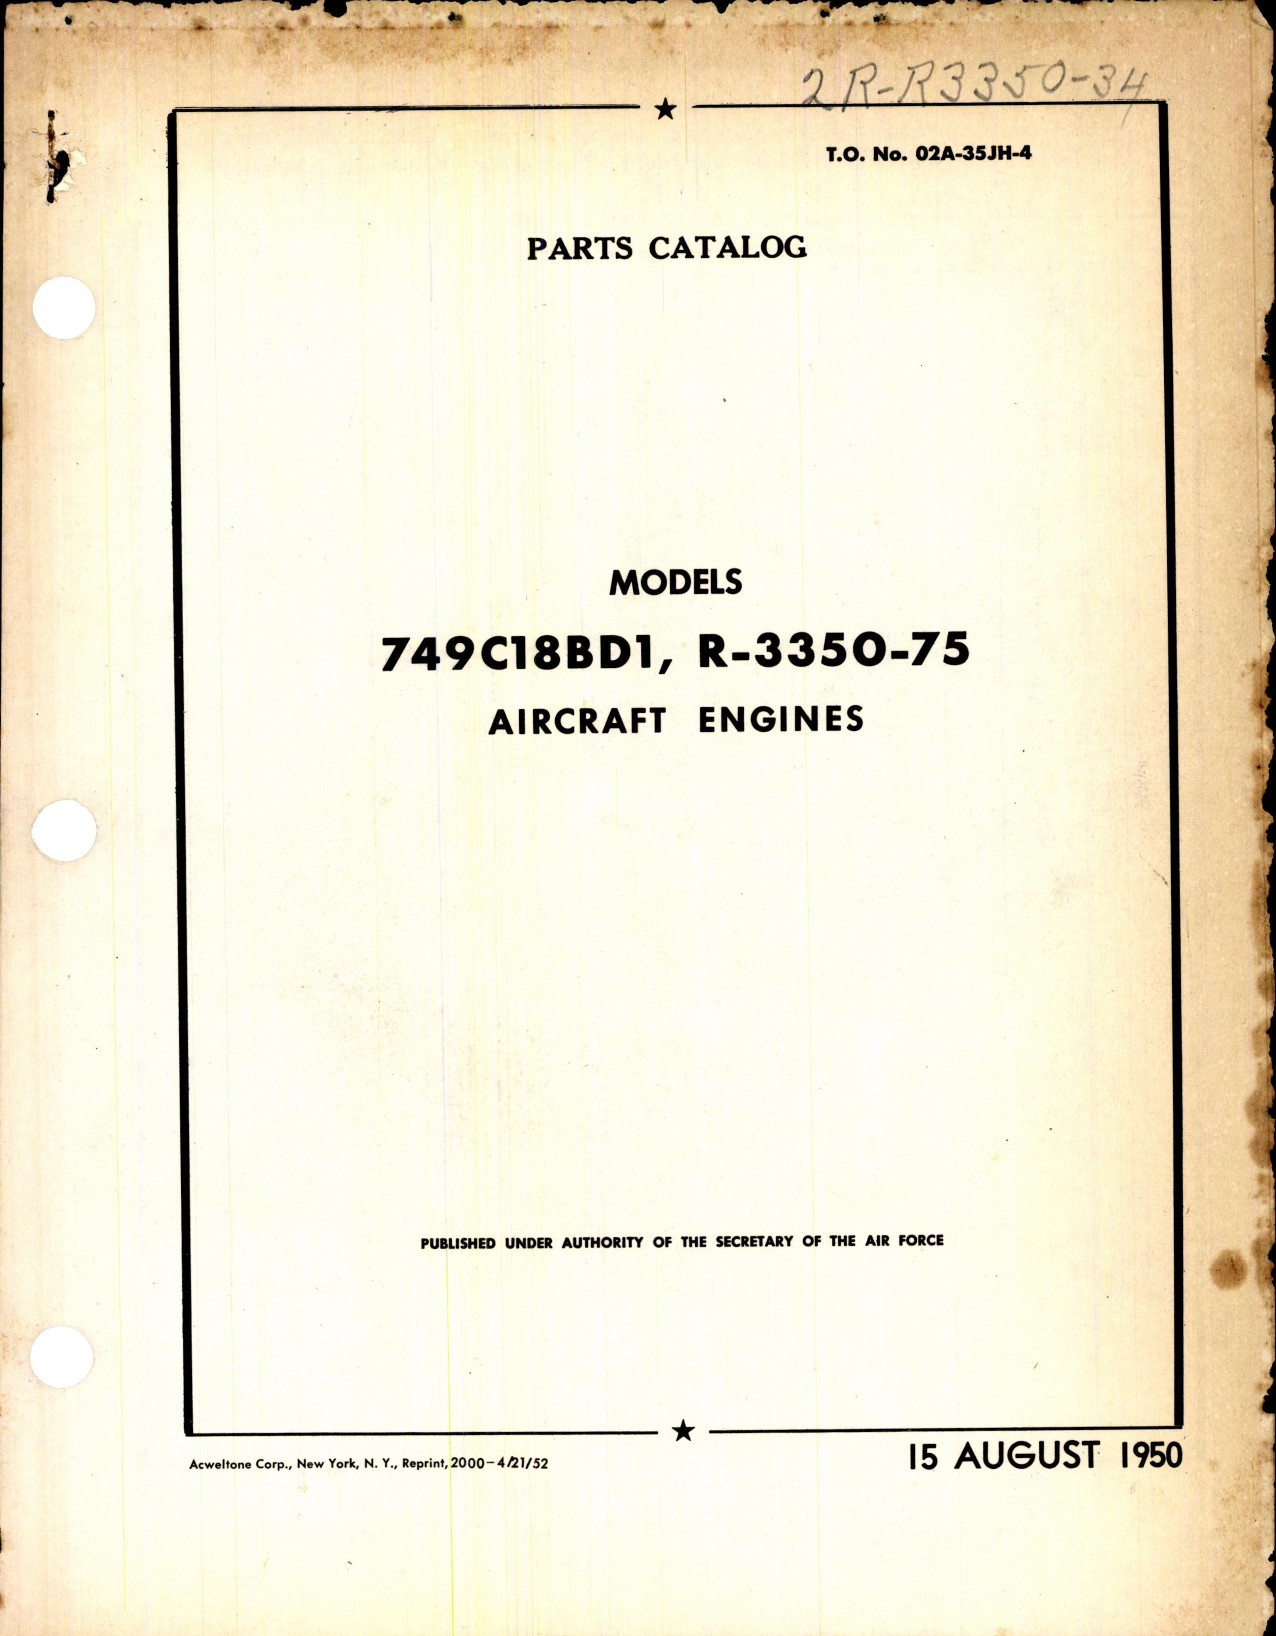 Sample page 1 from AirCorps Library document: Parts Catalog for Models 749C18BD1, and R-3350-75 Engines